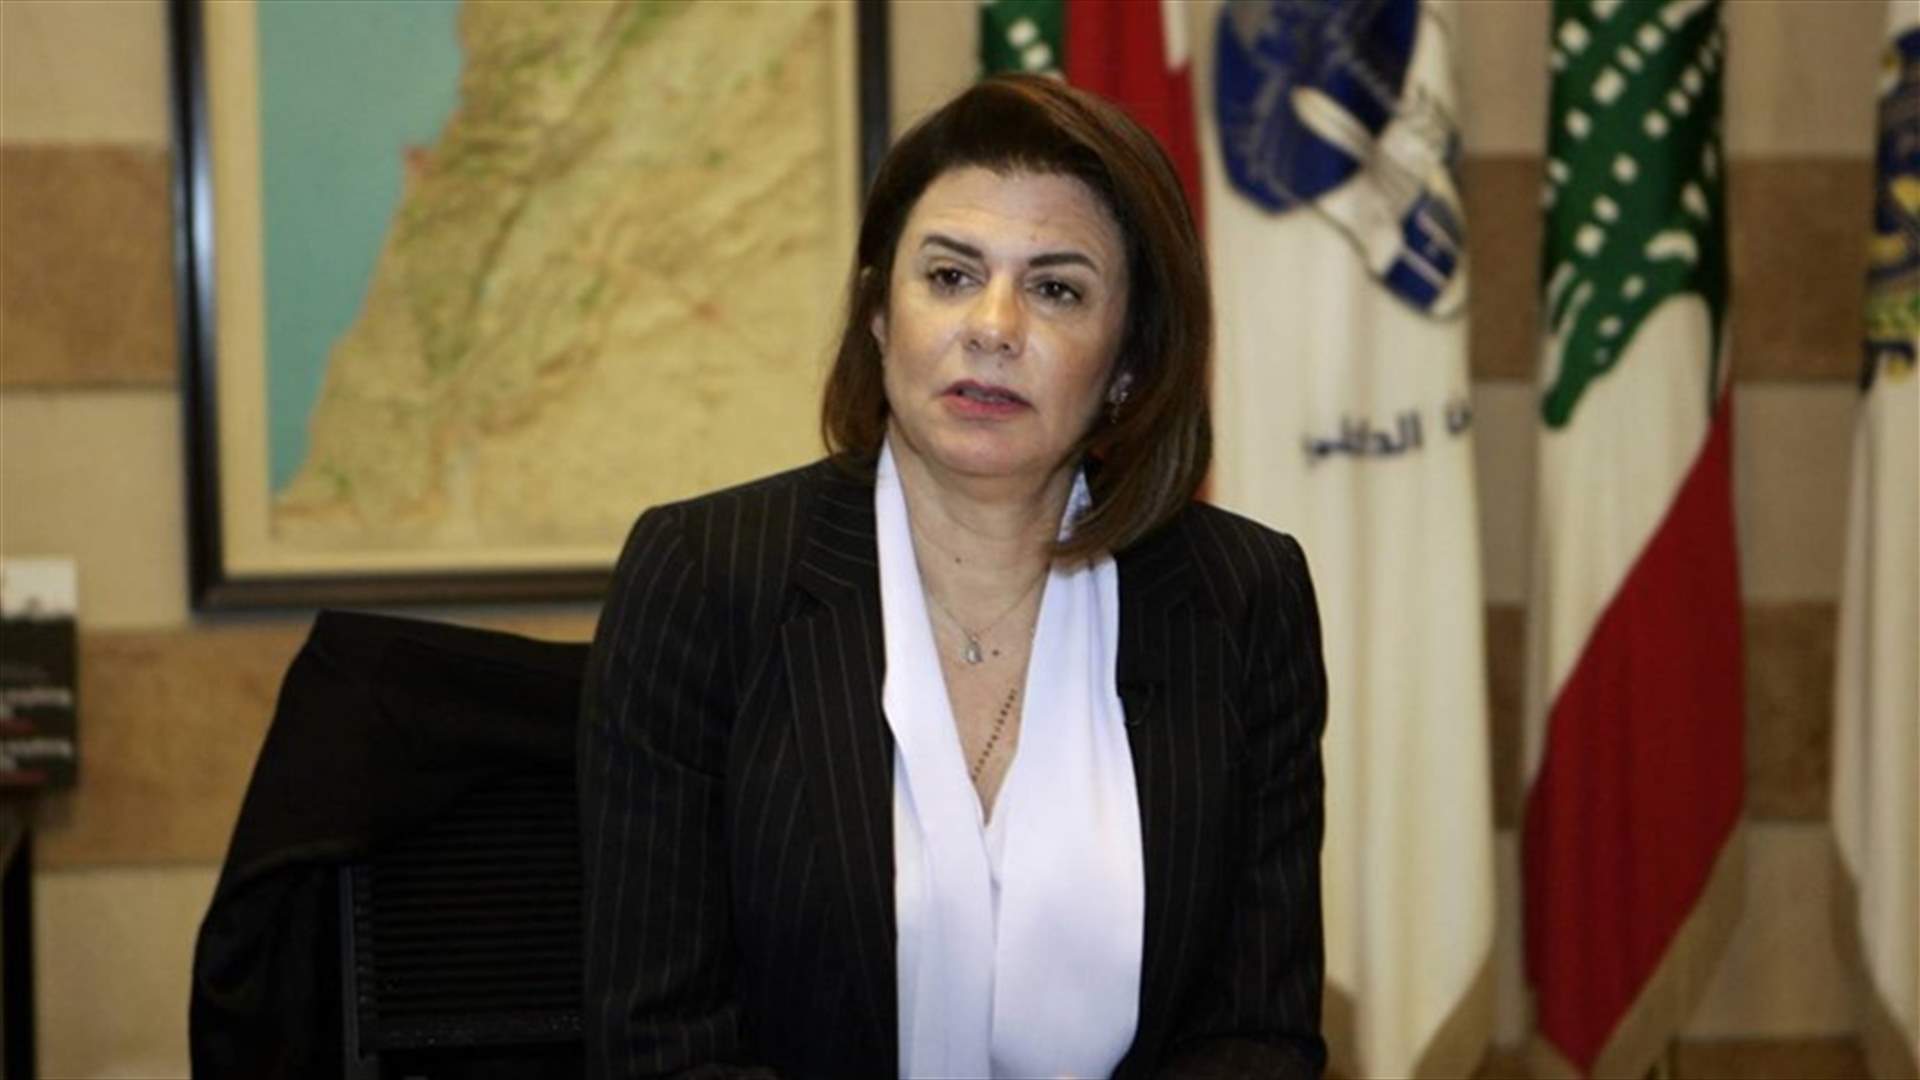 Interior Minister: We will work on alleviating negative effects on pensions and salaries